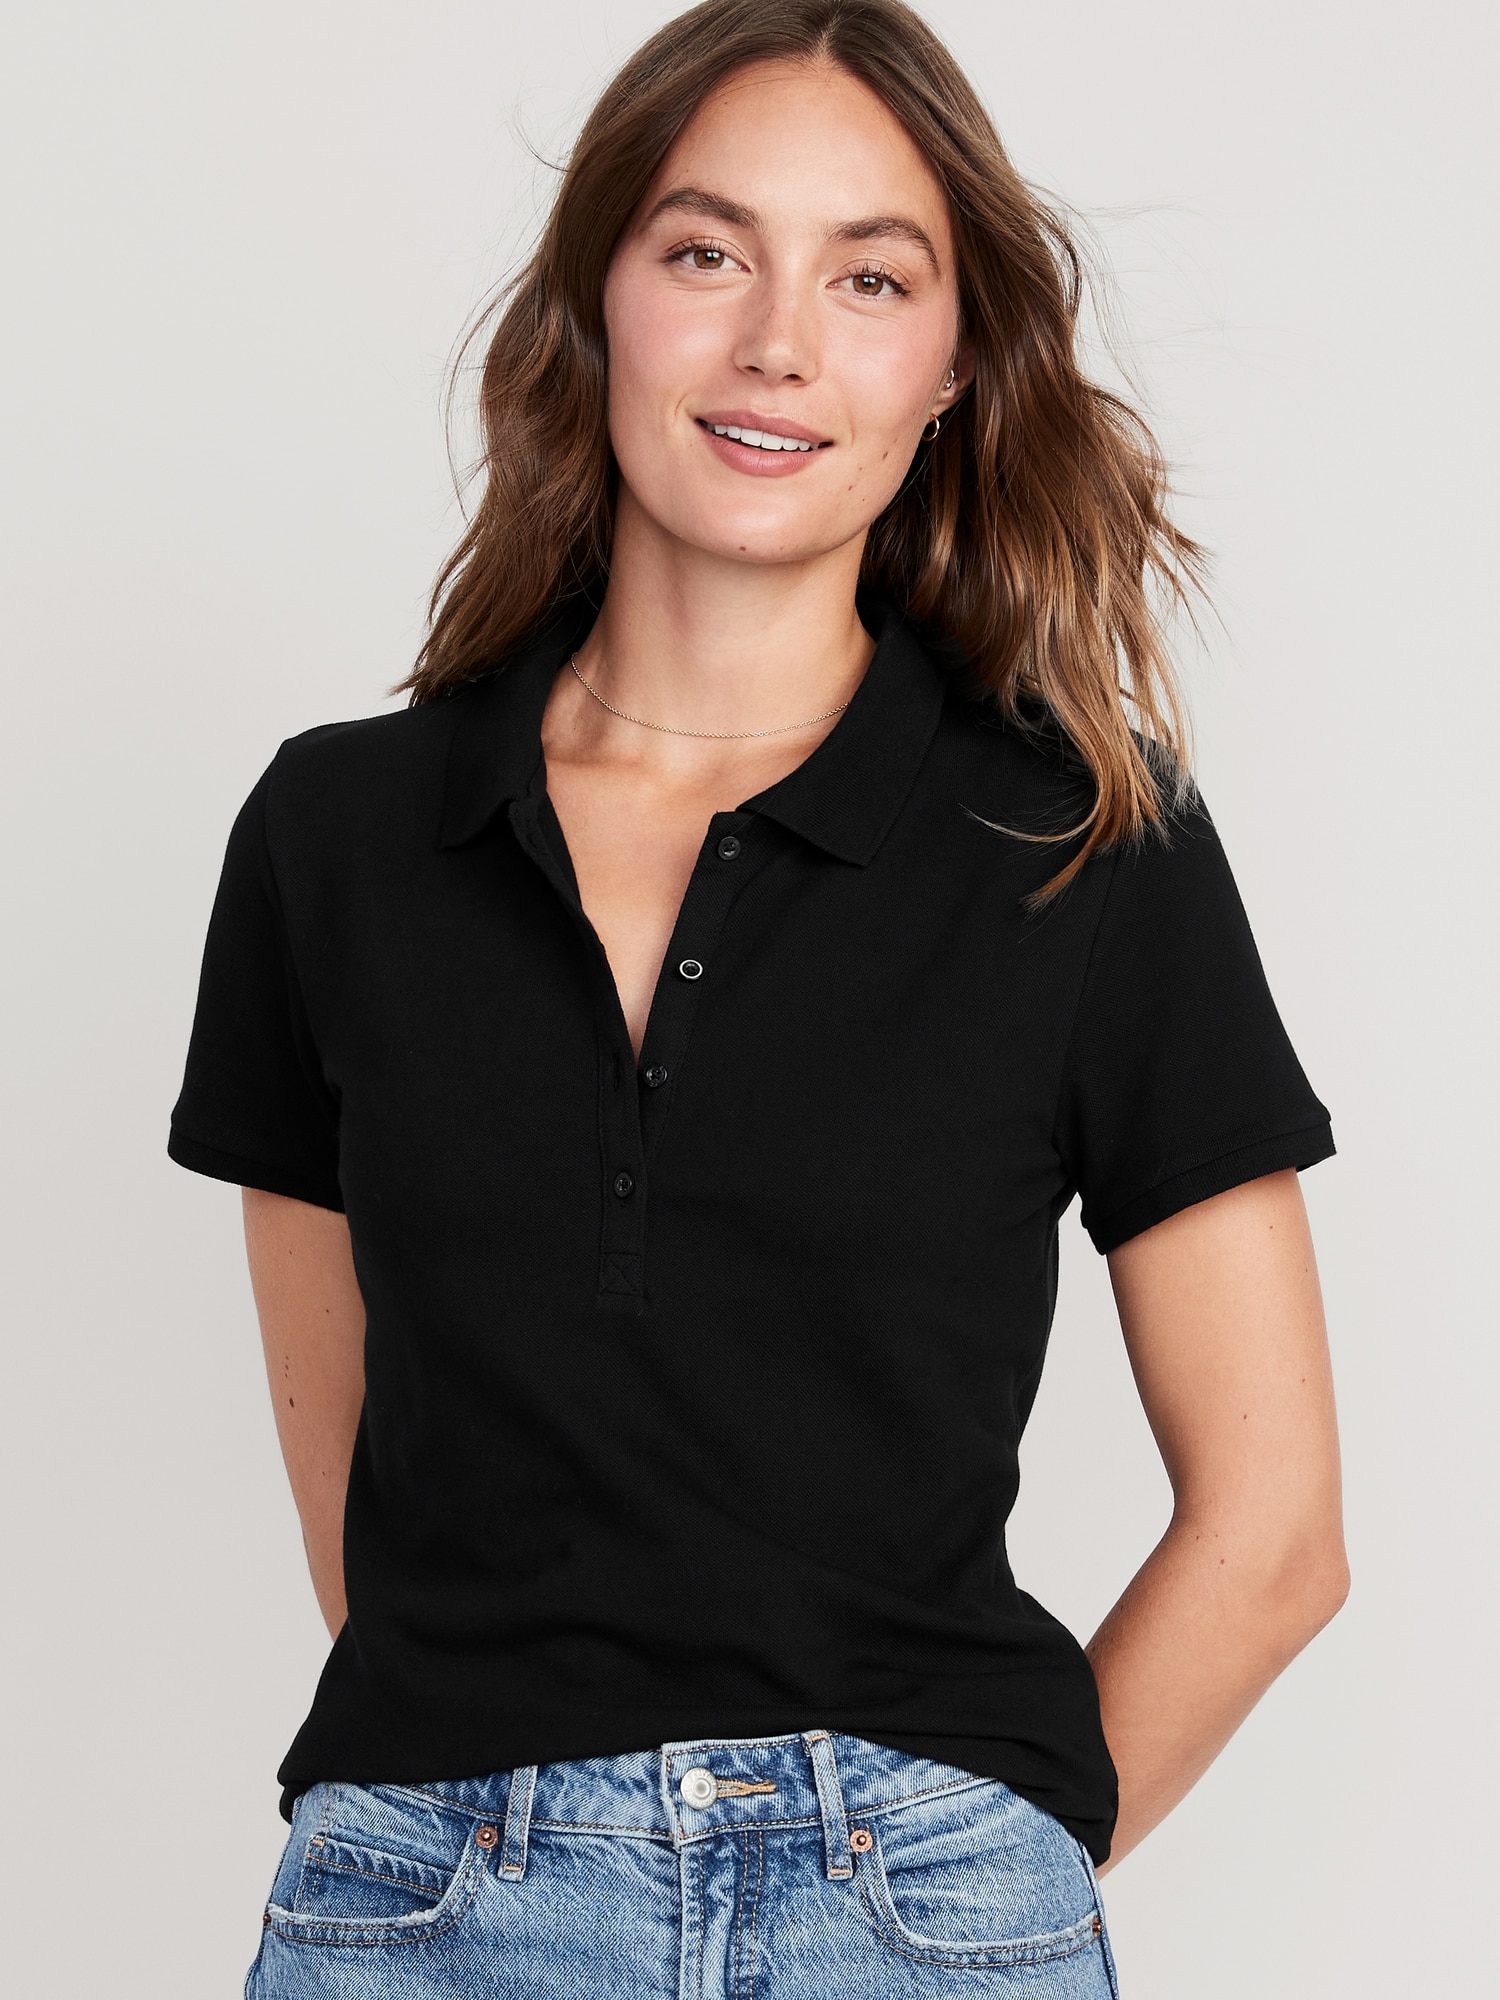 Women\'s Athletic Polo Shirts | Old Navy